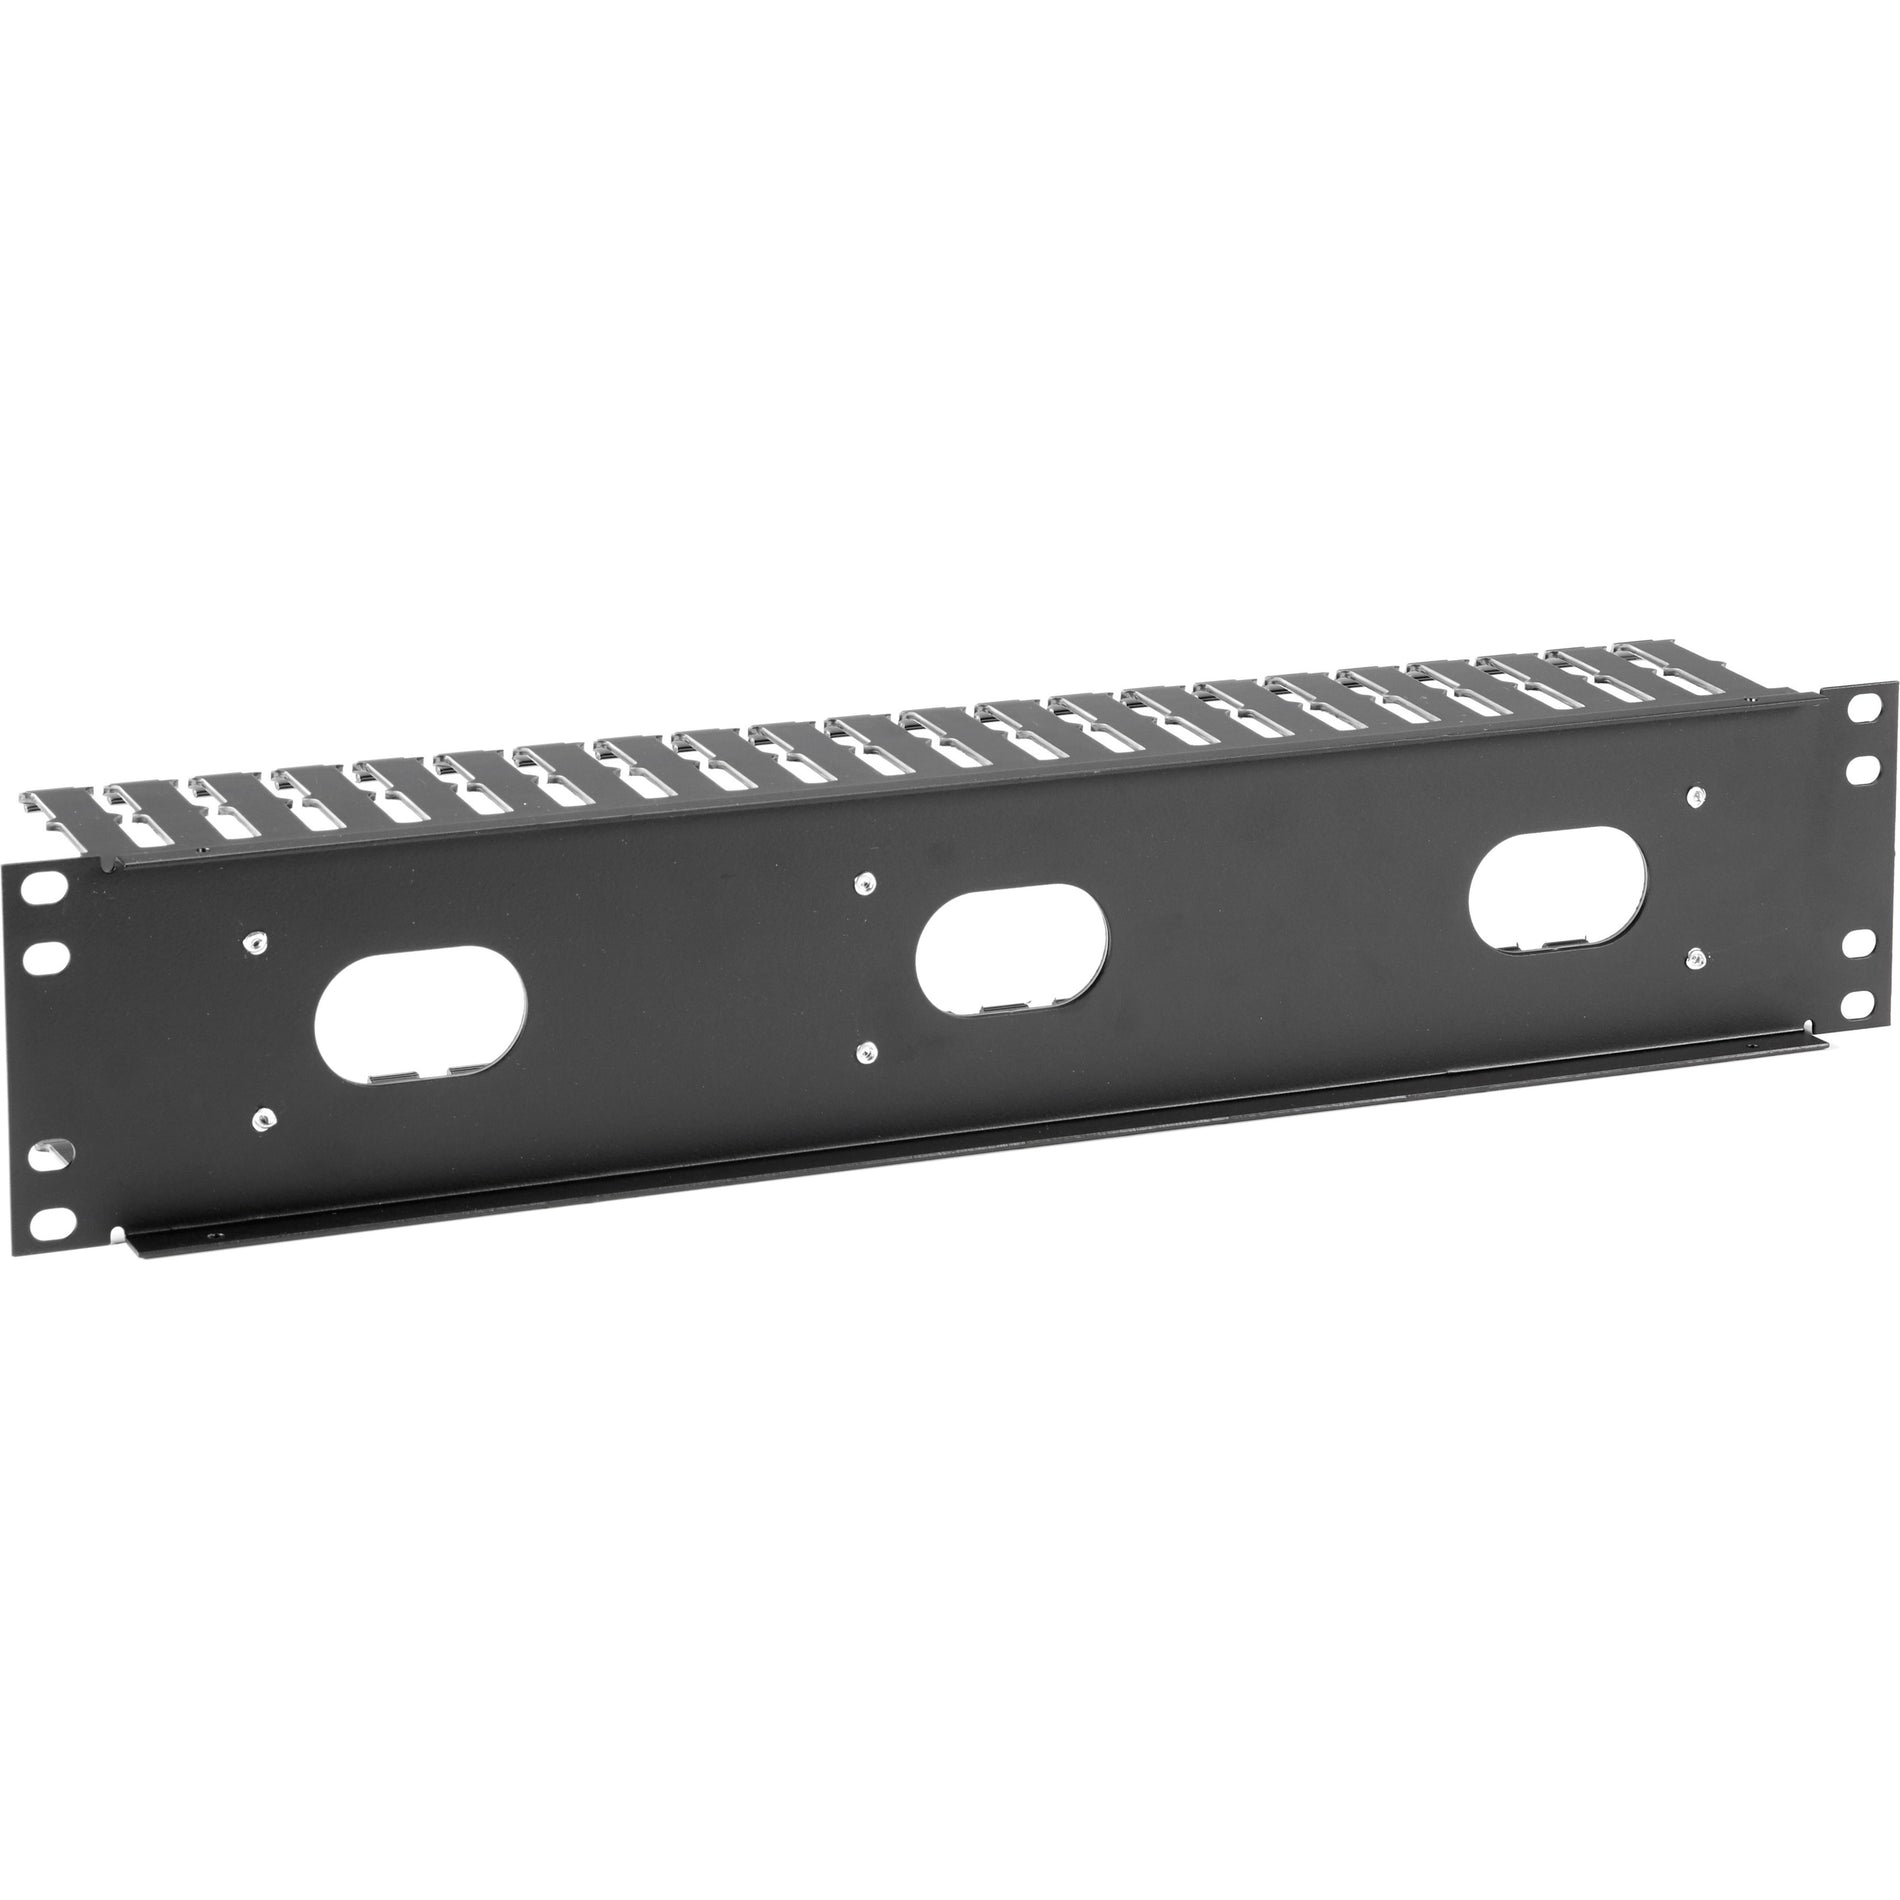 Black Box RMT102A-R4 Horizontal IT Rackmount Cable Manager - 2U, 19", Single-Sided, Black, TAA Compliant